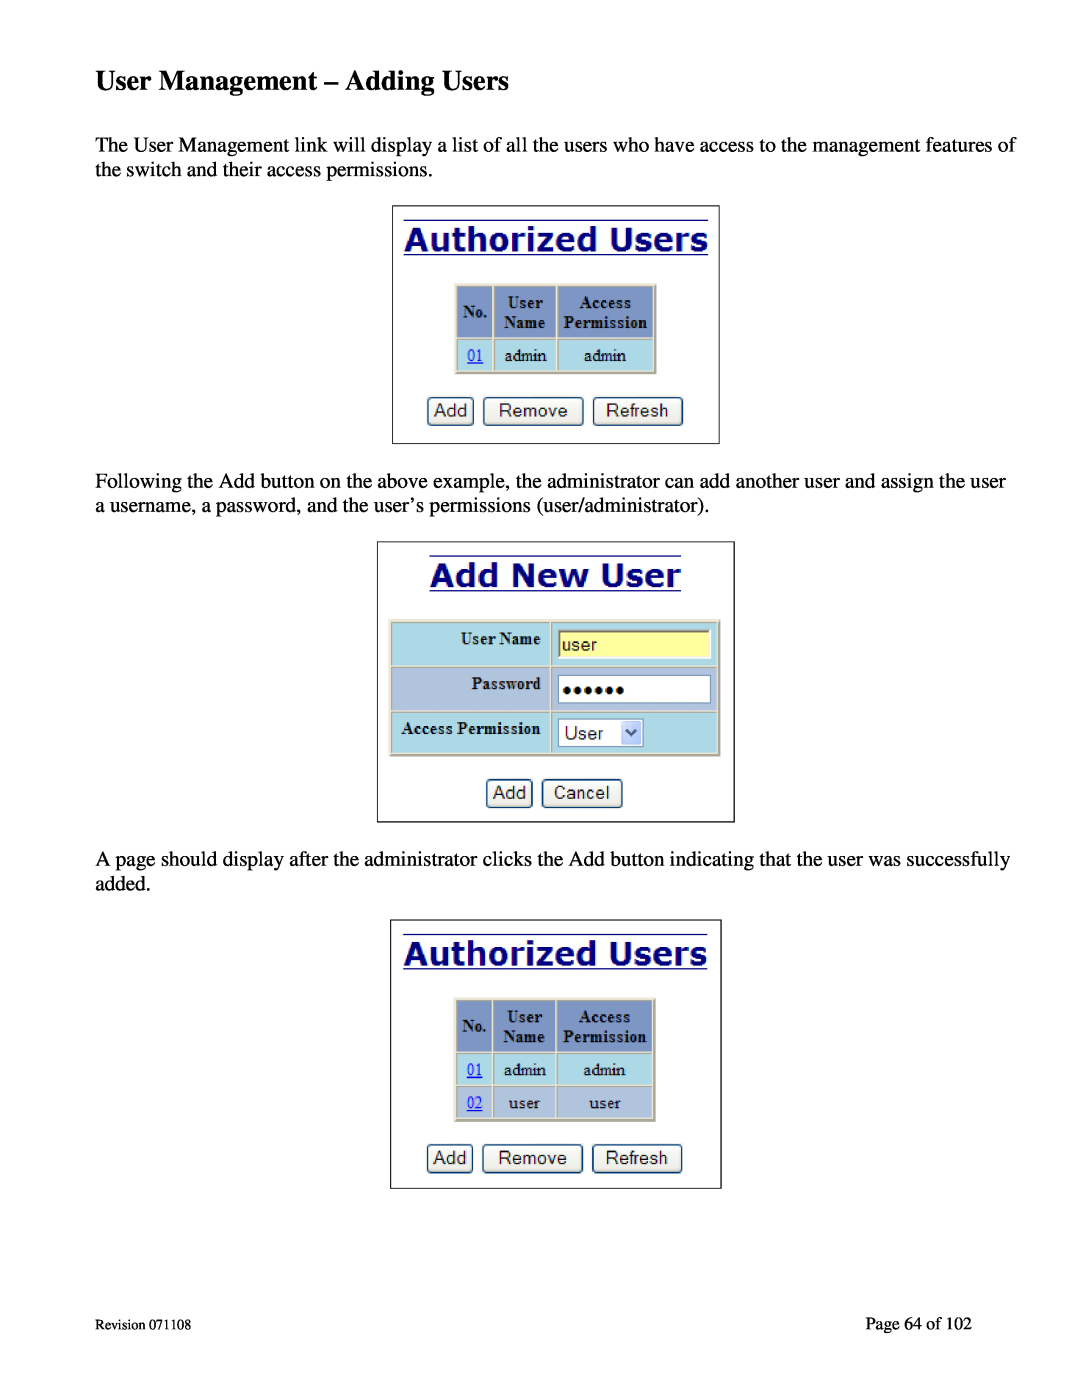 N-Tron 708M12 user manual User Management - Adding Users, Page 64 of 